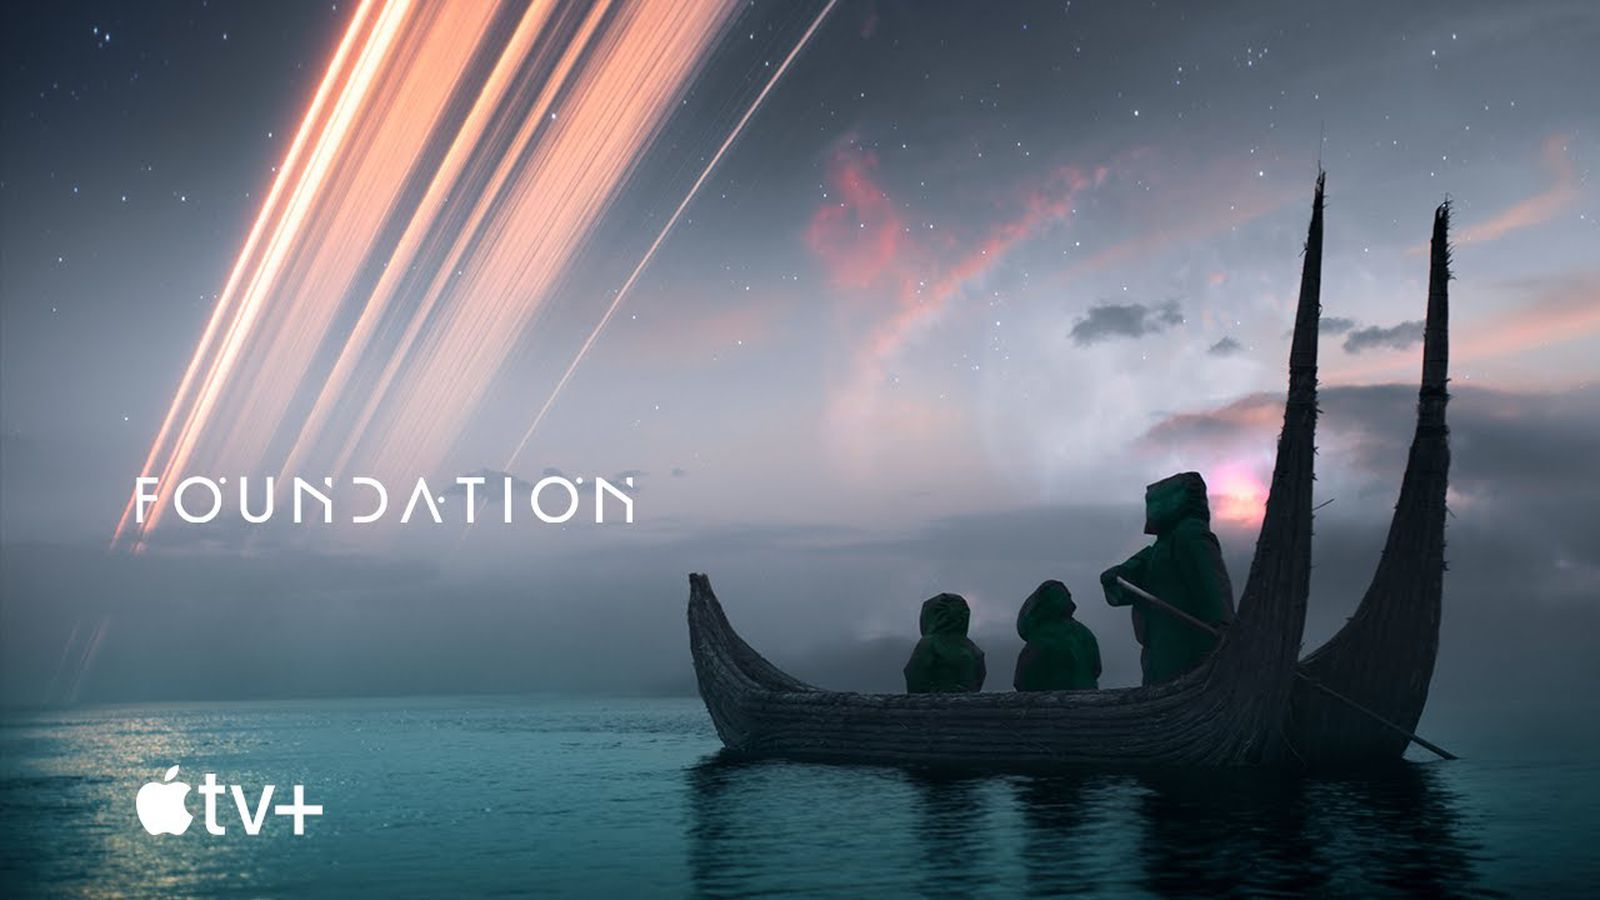 Apple TV+ Shares Trailer for Sci-Fi Series 'Foundation' Ahead of September 24 Premiere